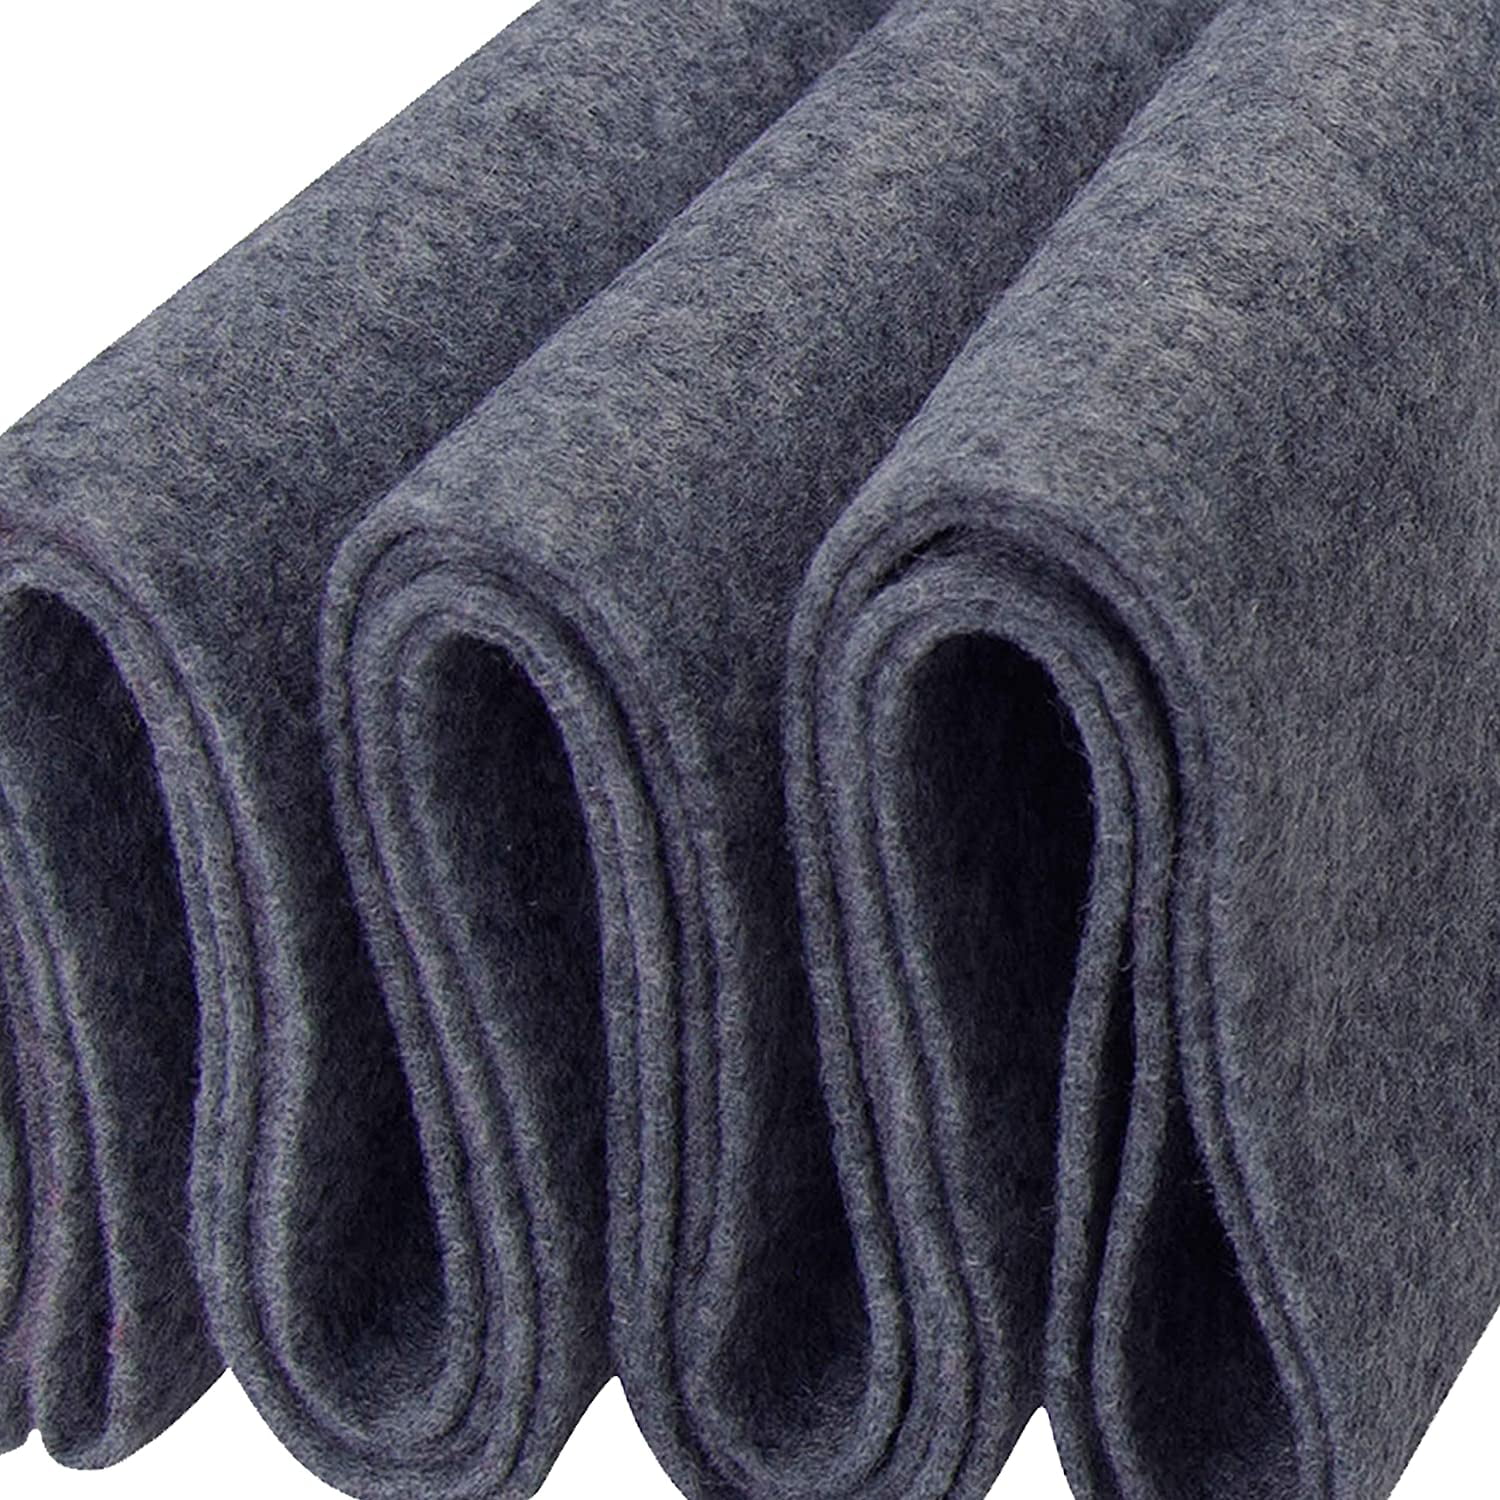 Felt Fabric by The Yard - 72 Wide, Thick Acrylic Felt - Non Woven Material, for Cushions, DIY Projects, Hobbies, Holiday, Decorations by Ice